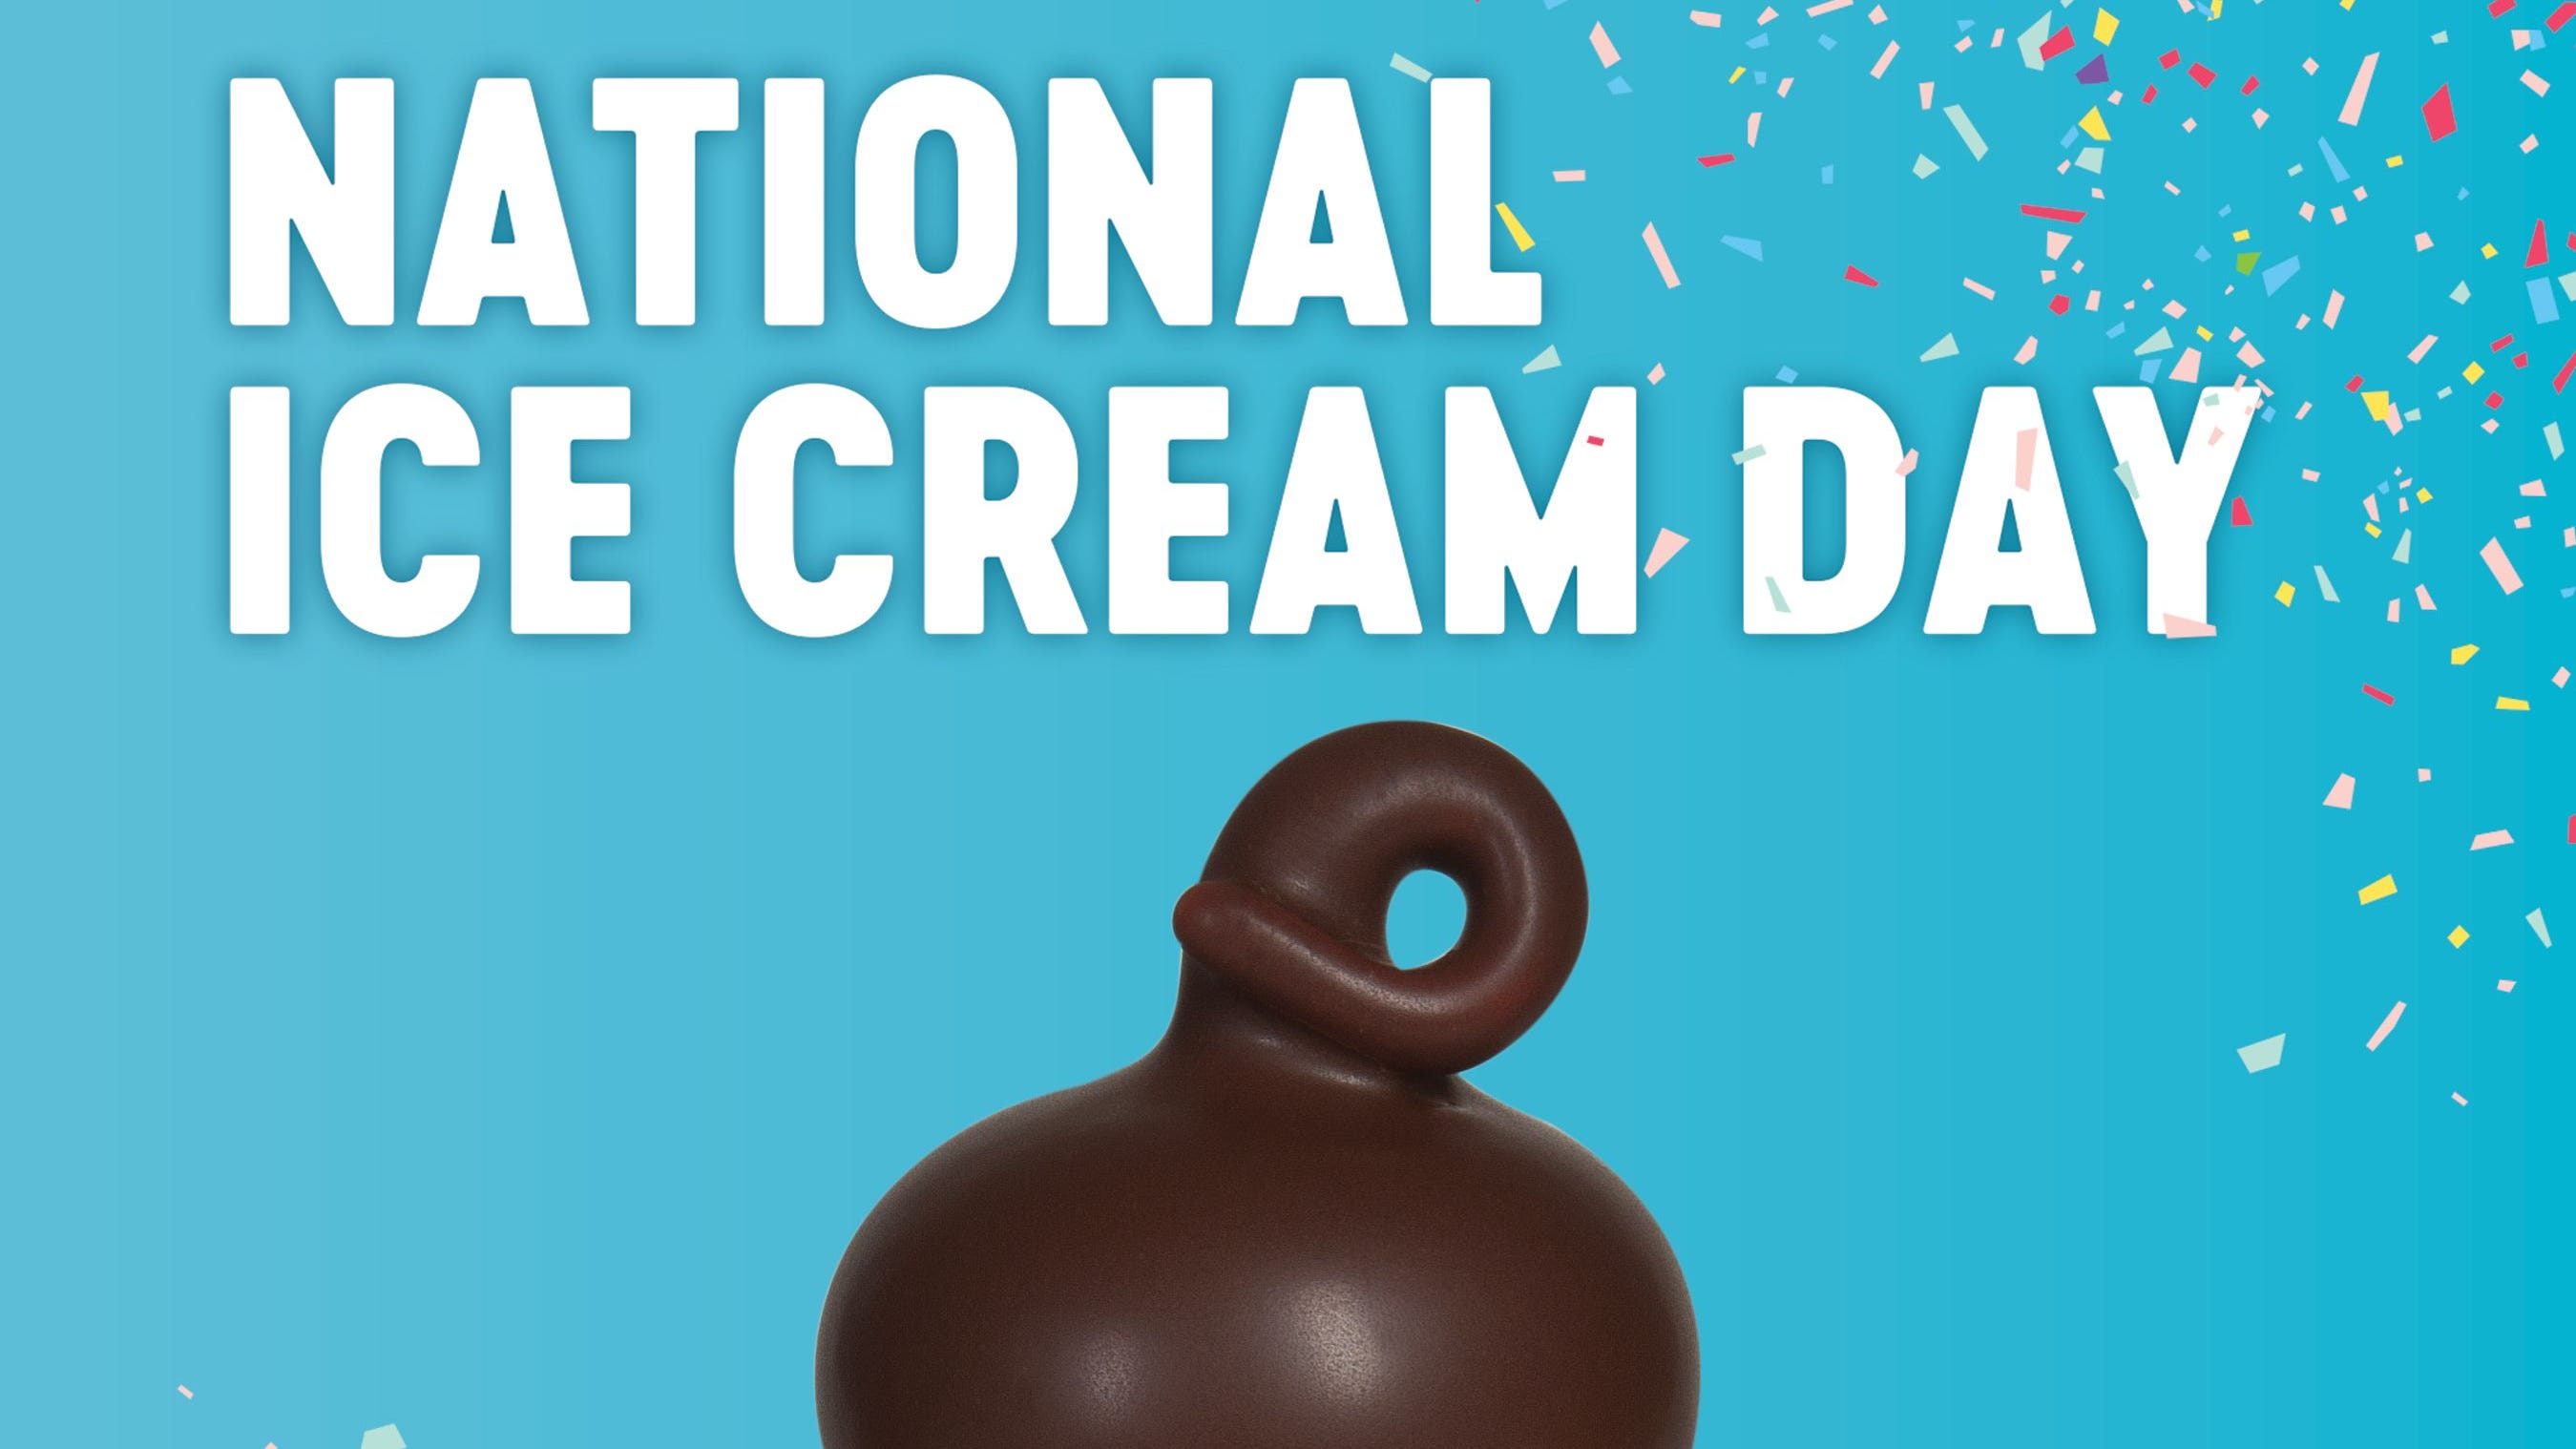 National Ice Cream Day offer at Dairy Queen